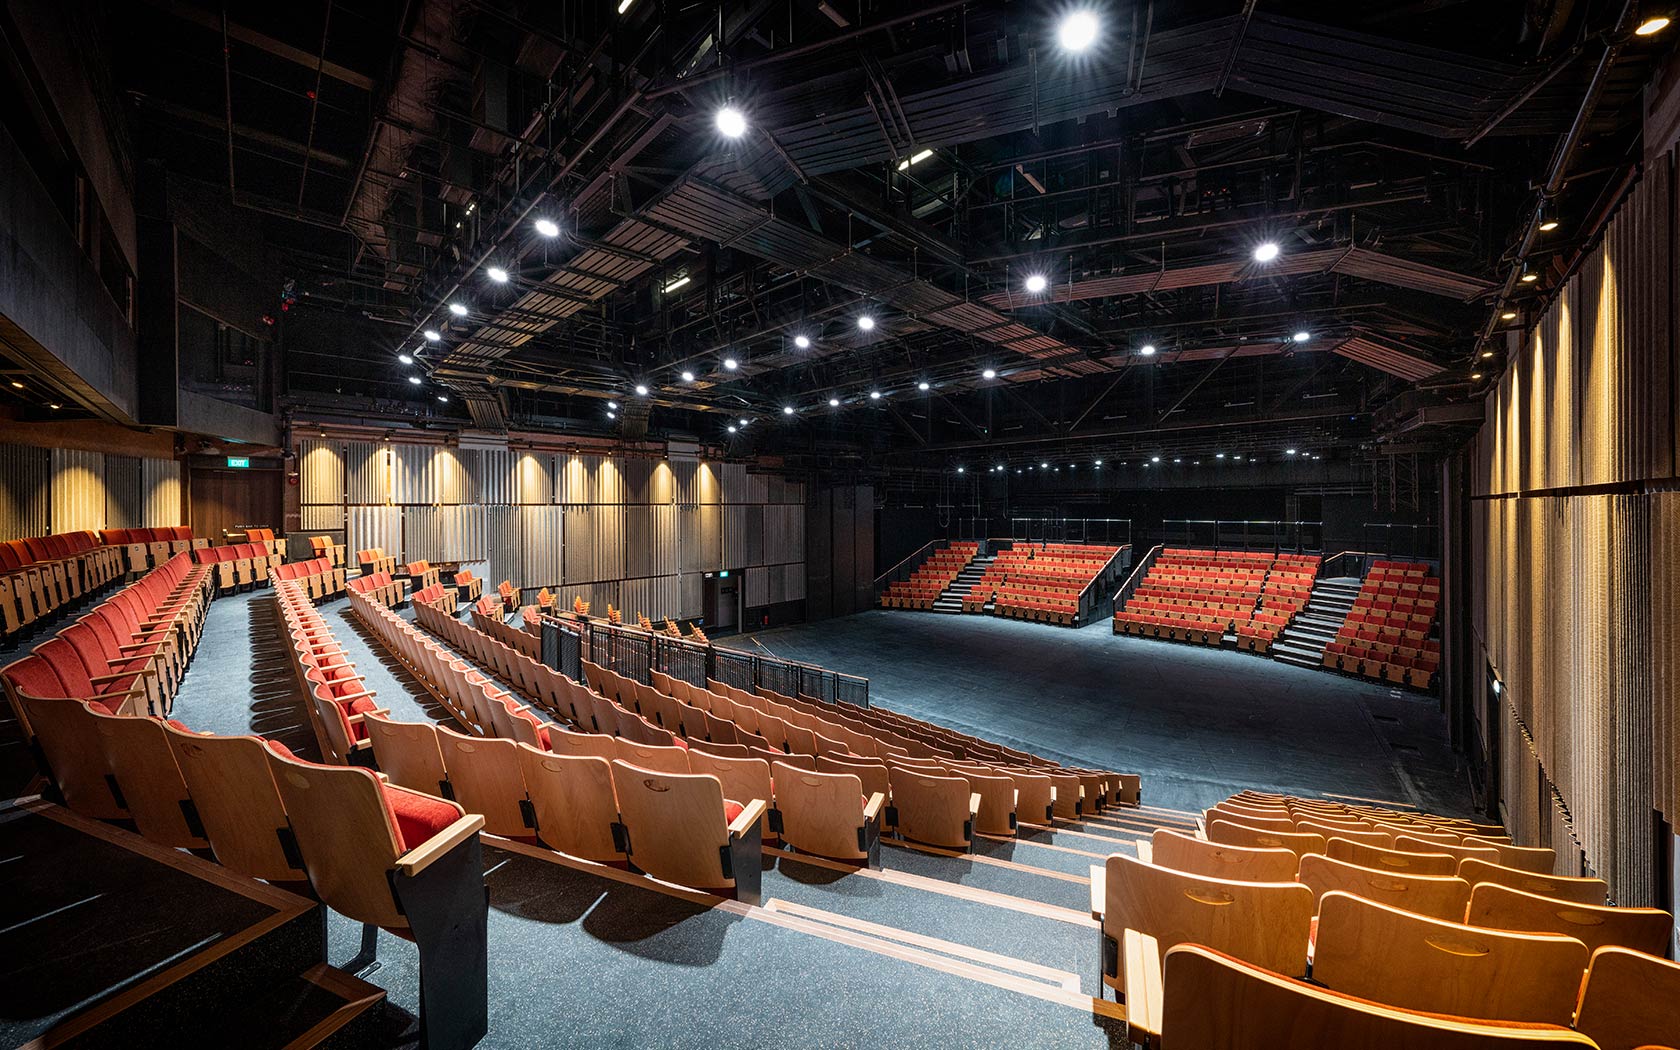 Image of the interior of the Singtel Waterfront Theatre with seats configured in traverse.